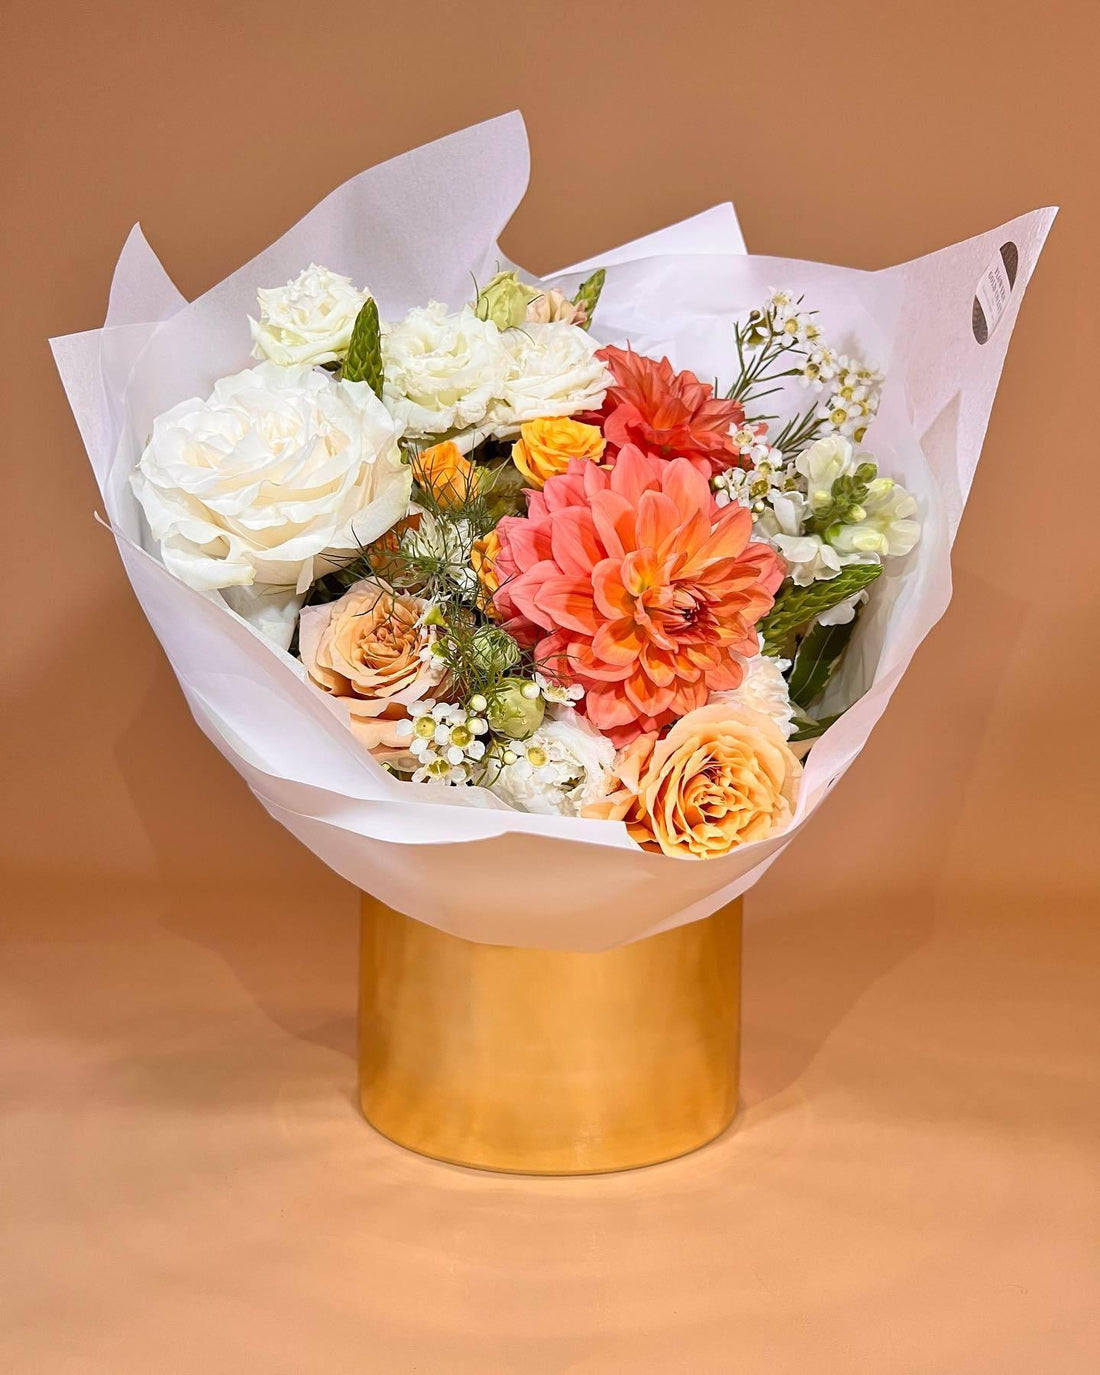 Peachy 🍑🤍 - A warm combination of mandarine, sherbet, whites and peachy tones. <br />
<br />
T - Flowers Gold Coast